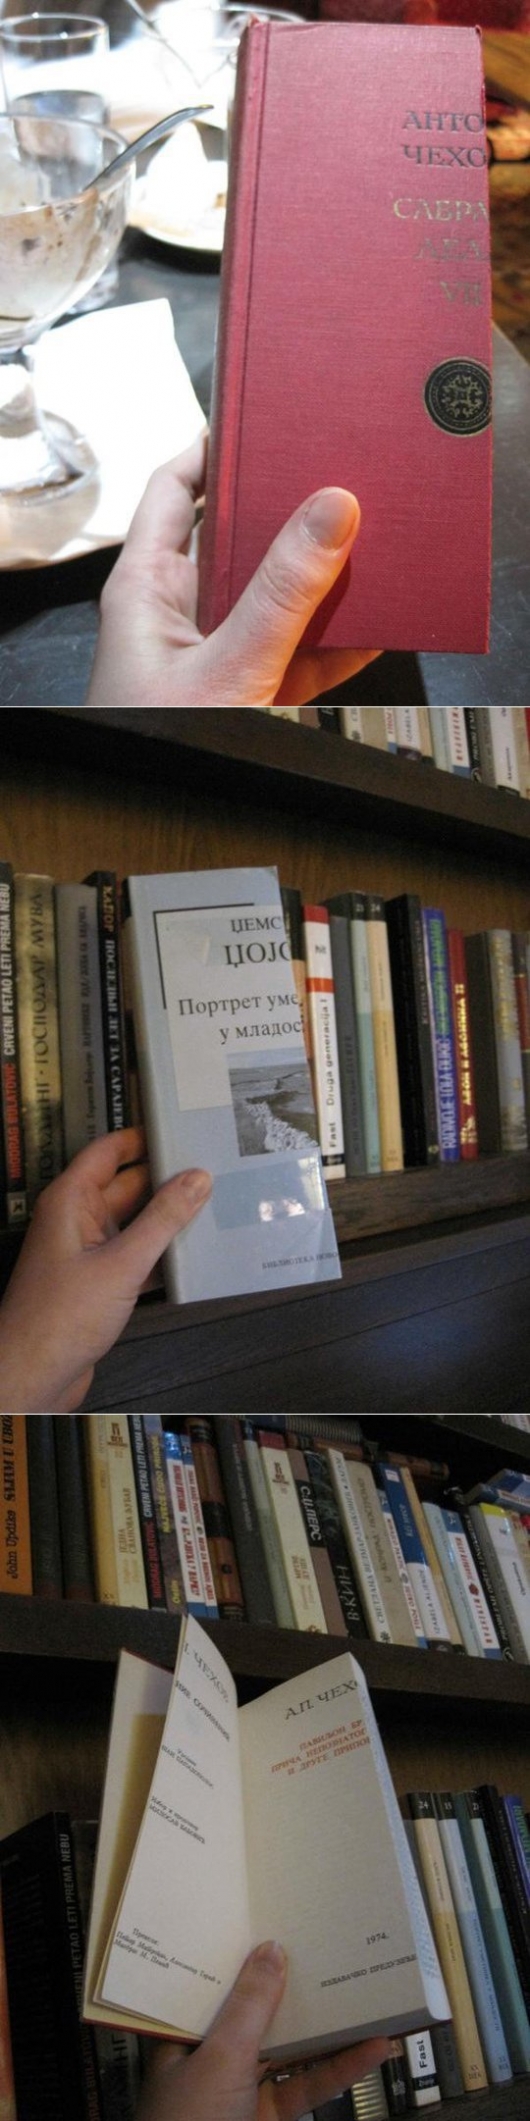 Just for the looks: half-books on a shelf